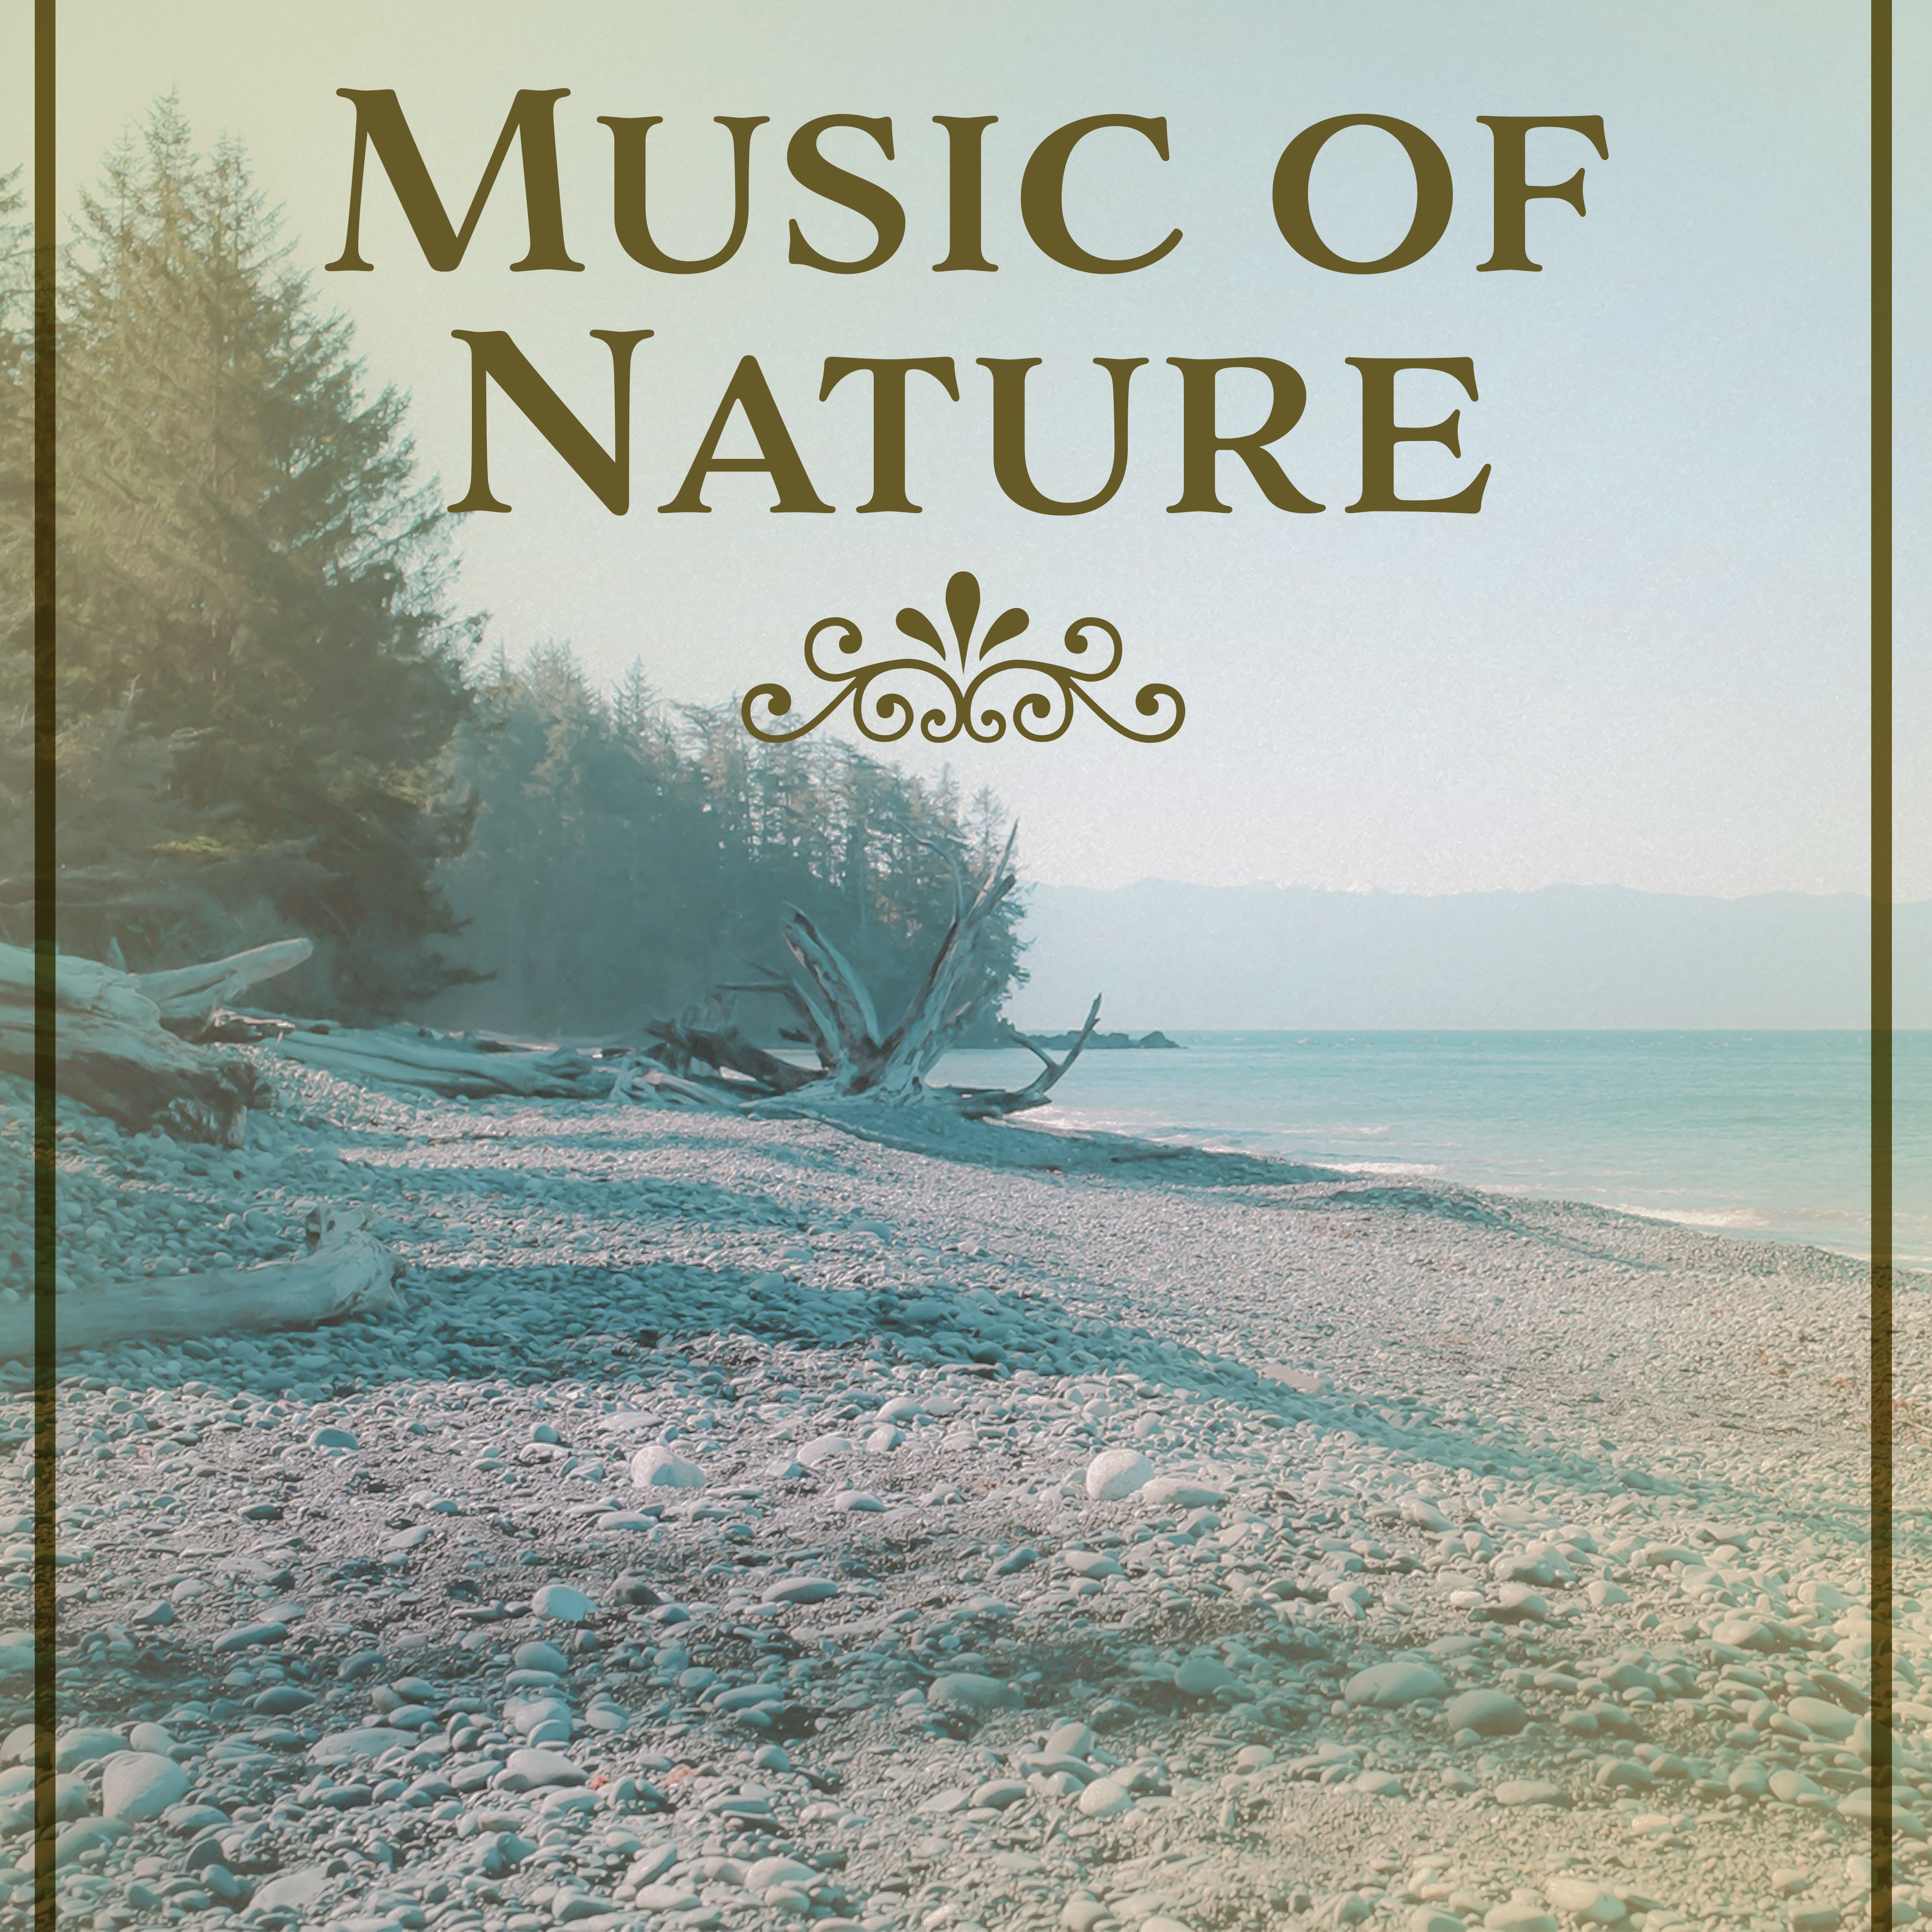 Music of Nature – Calming Sounds of Nature, Relaxing Music, Massage, Sleep, Meditation, Relaxed Body & Soul